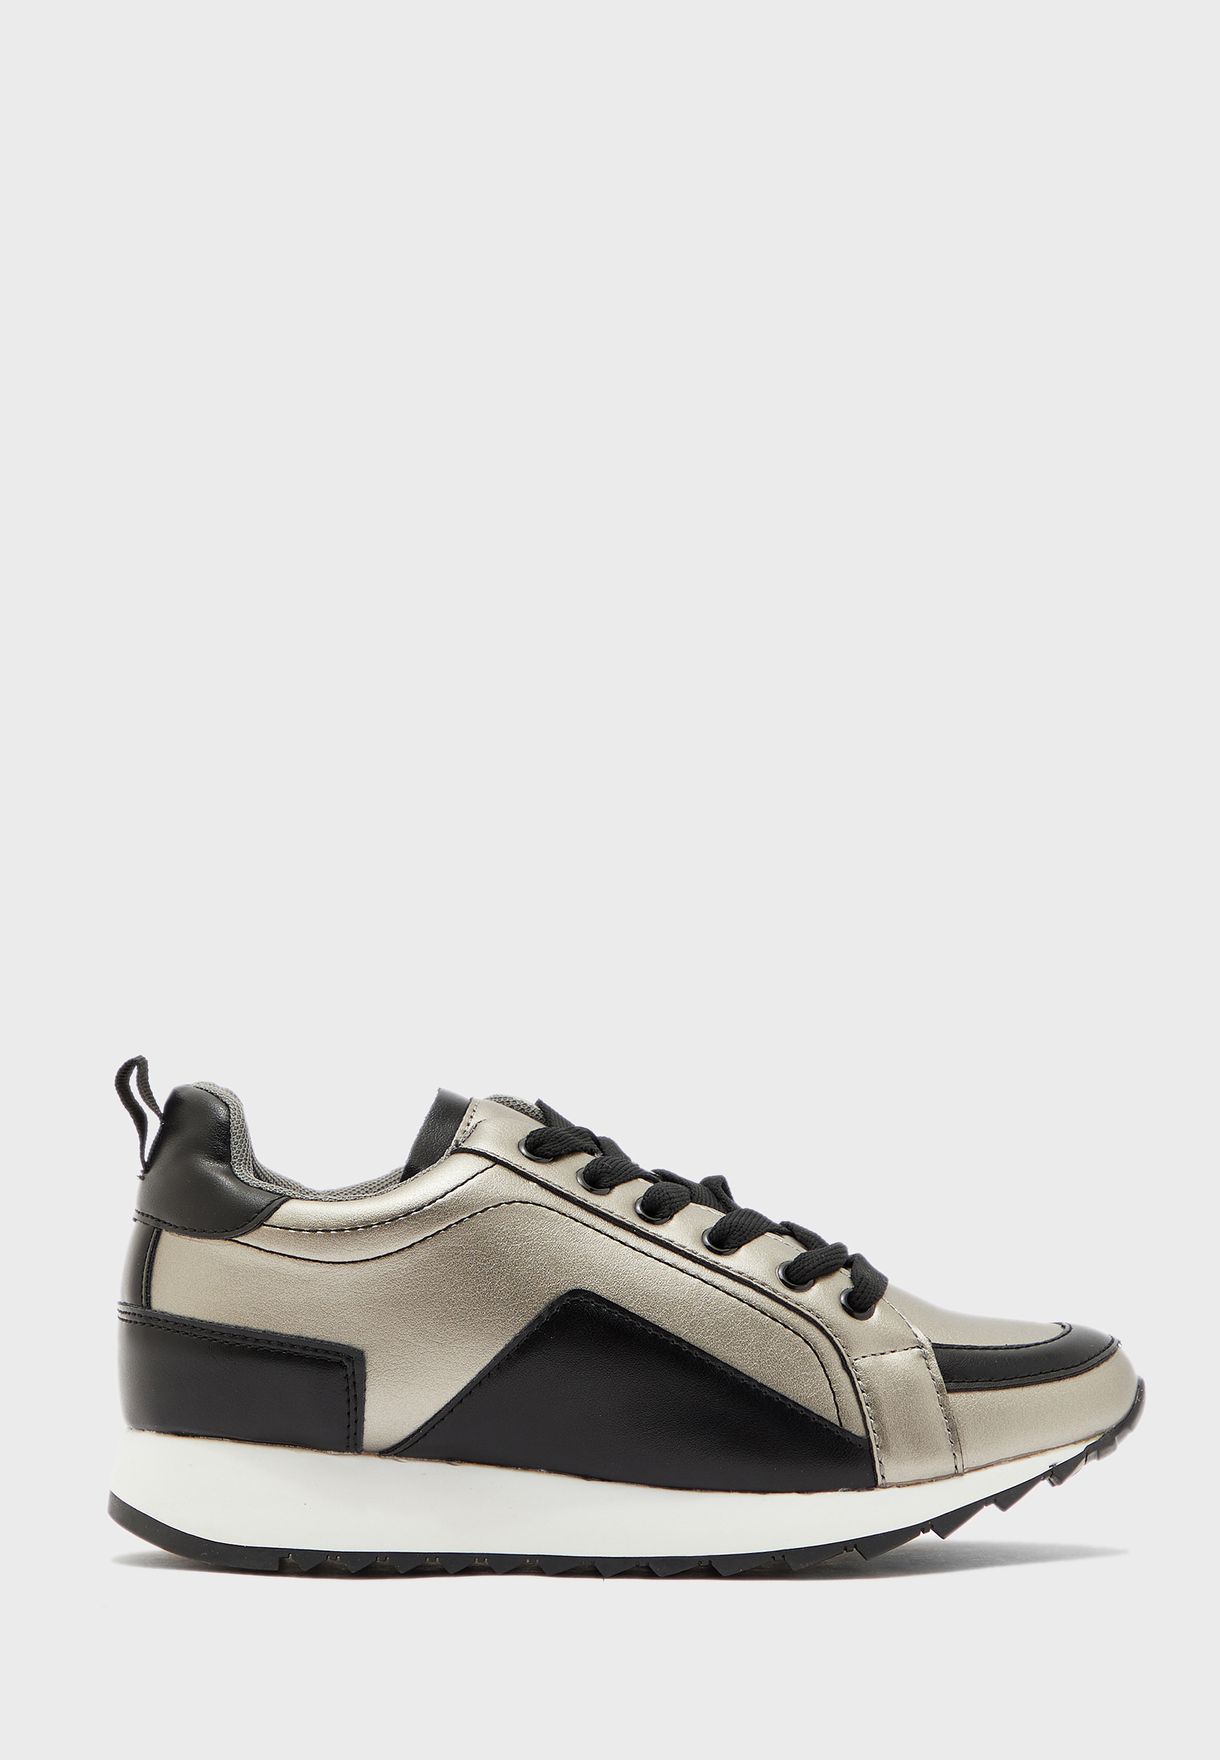 silver colour sneakers